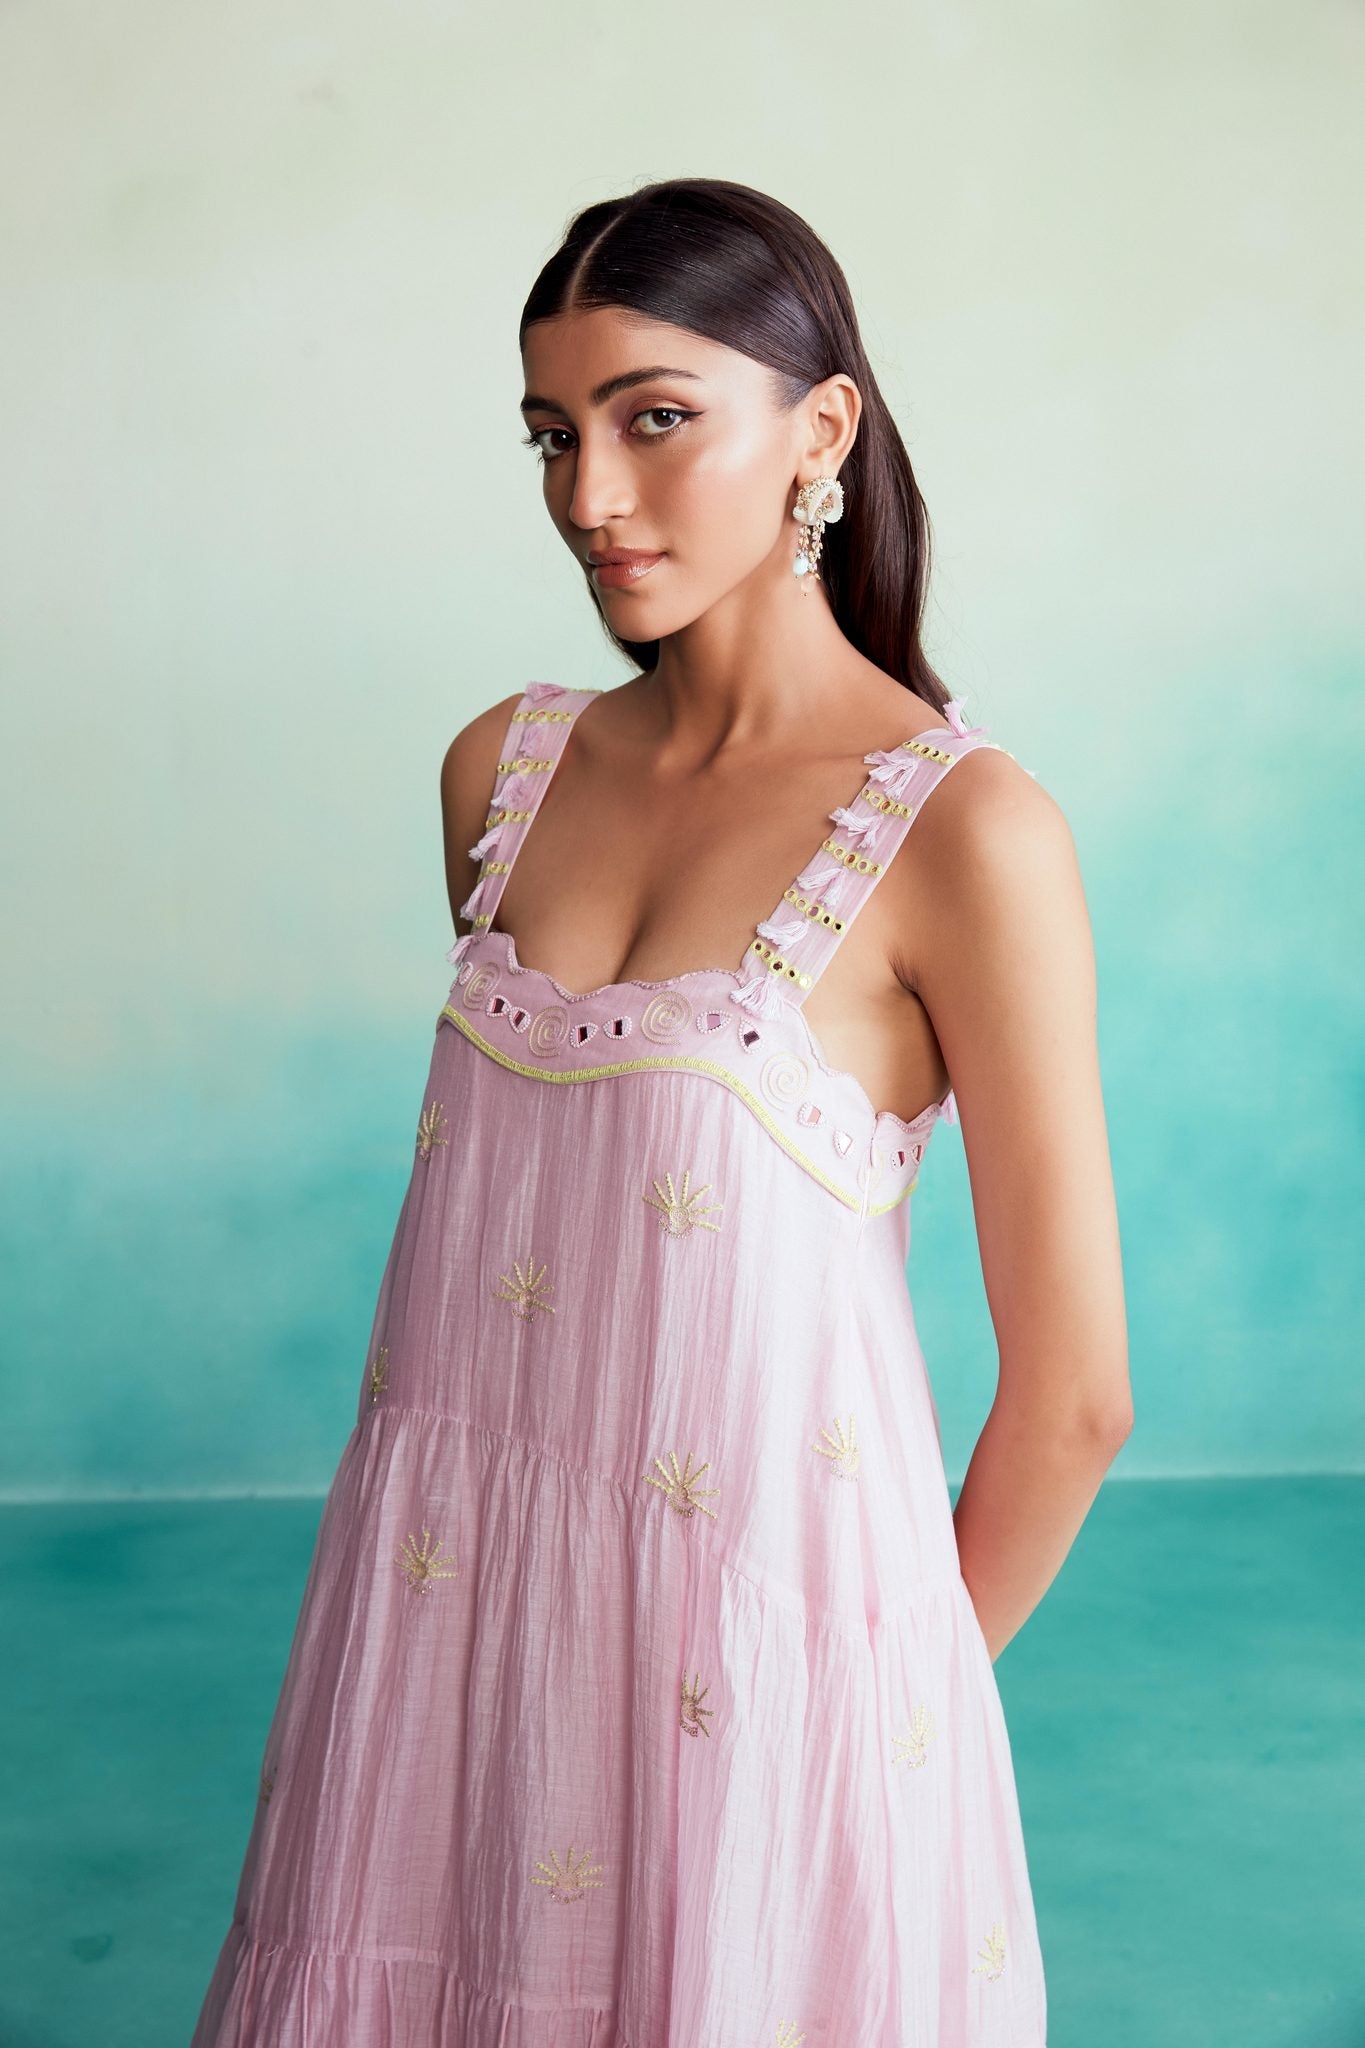 Blossom dress - Orchid Pink Hand embroidered layered gathered Dress